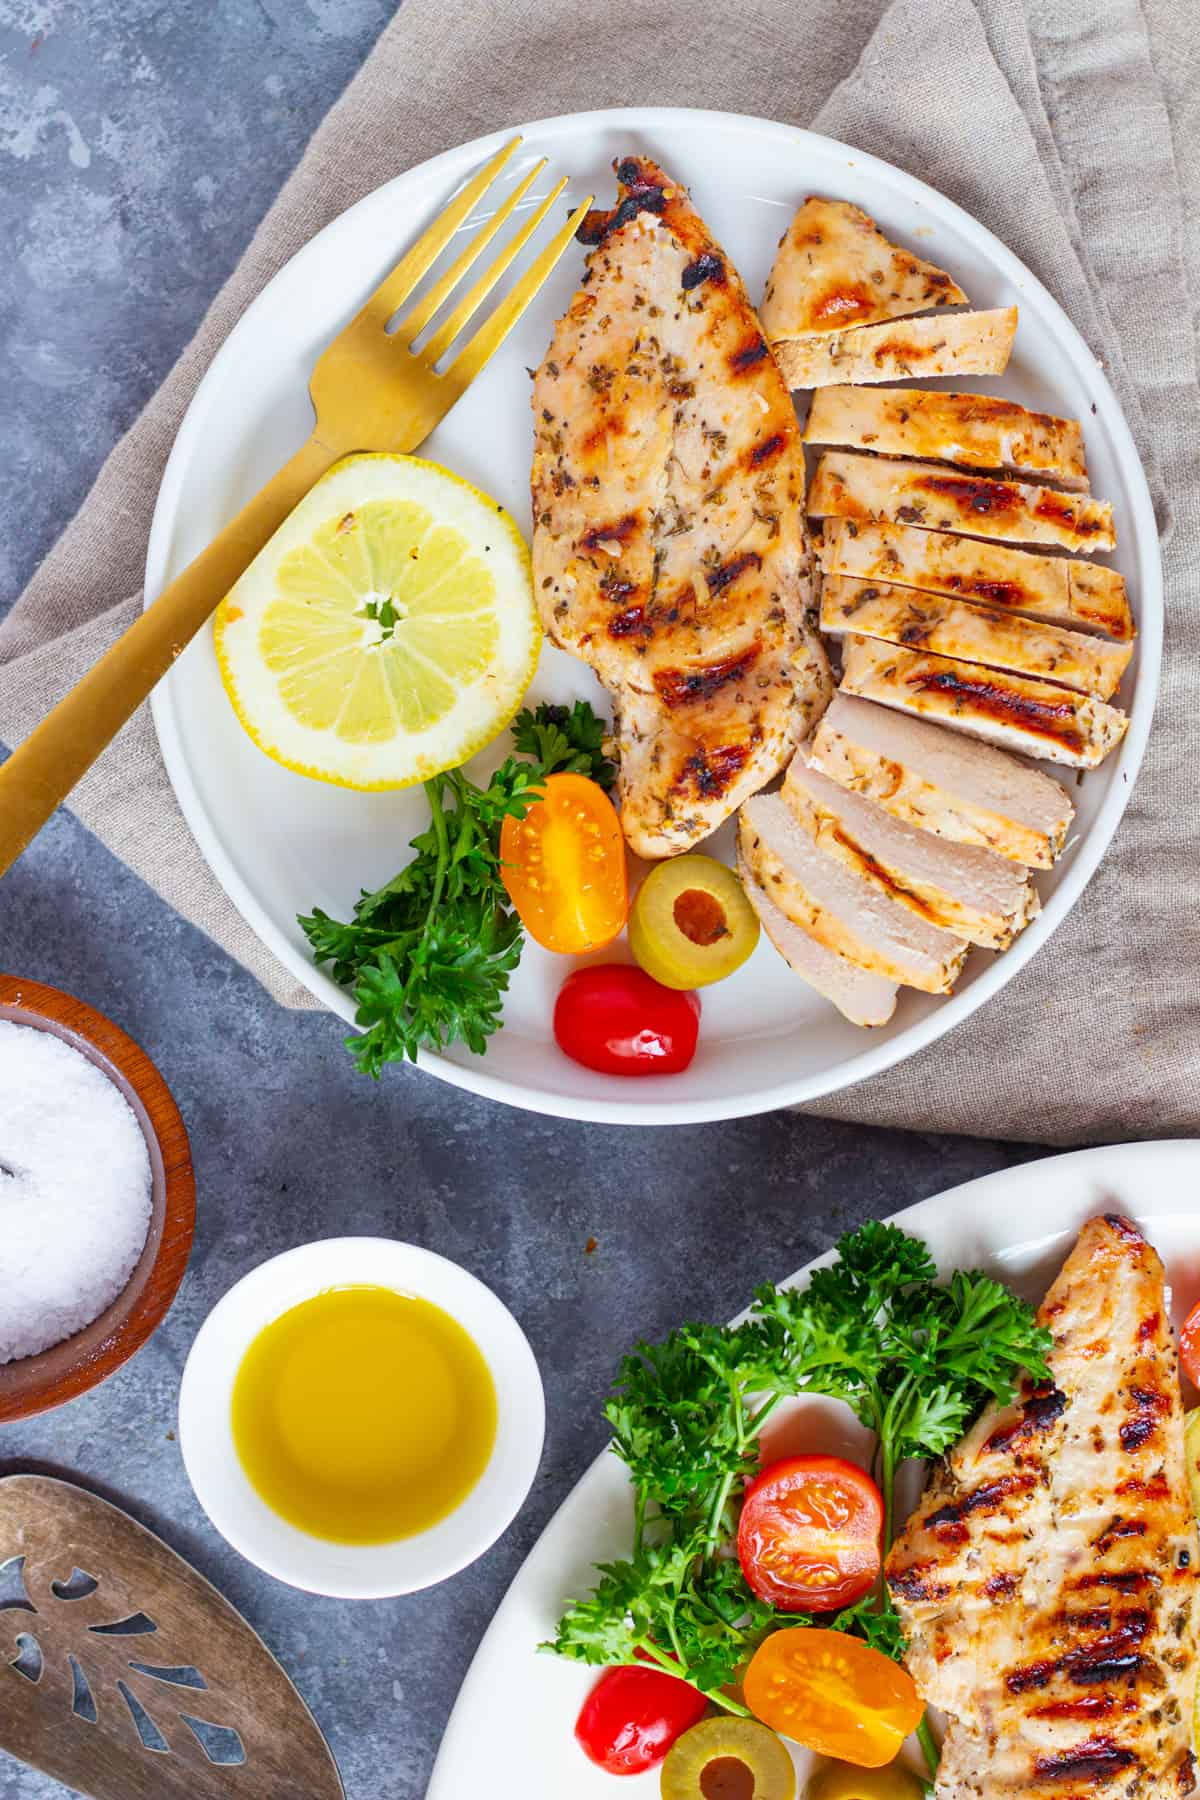 Juicy grilled chicken slices easily and can be served on its own or with salad. 